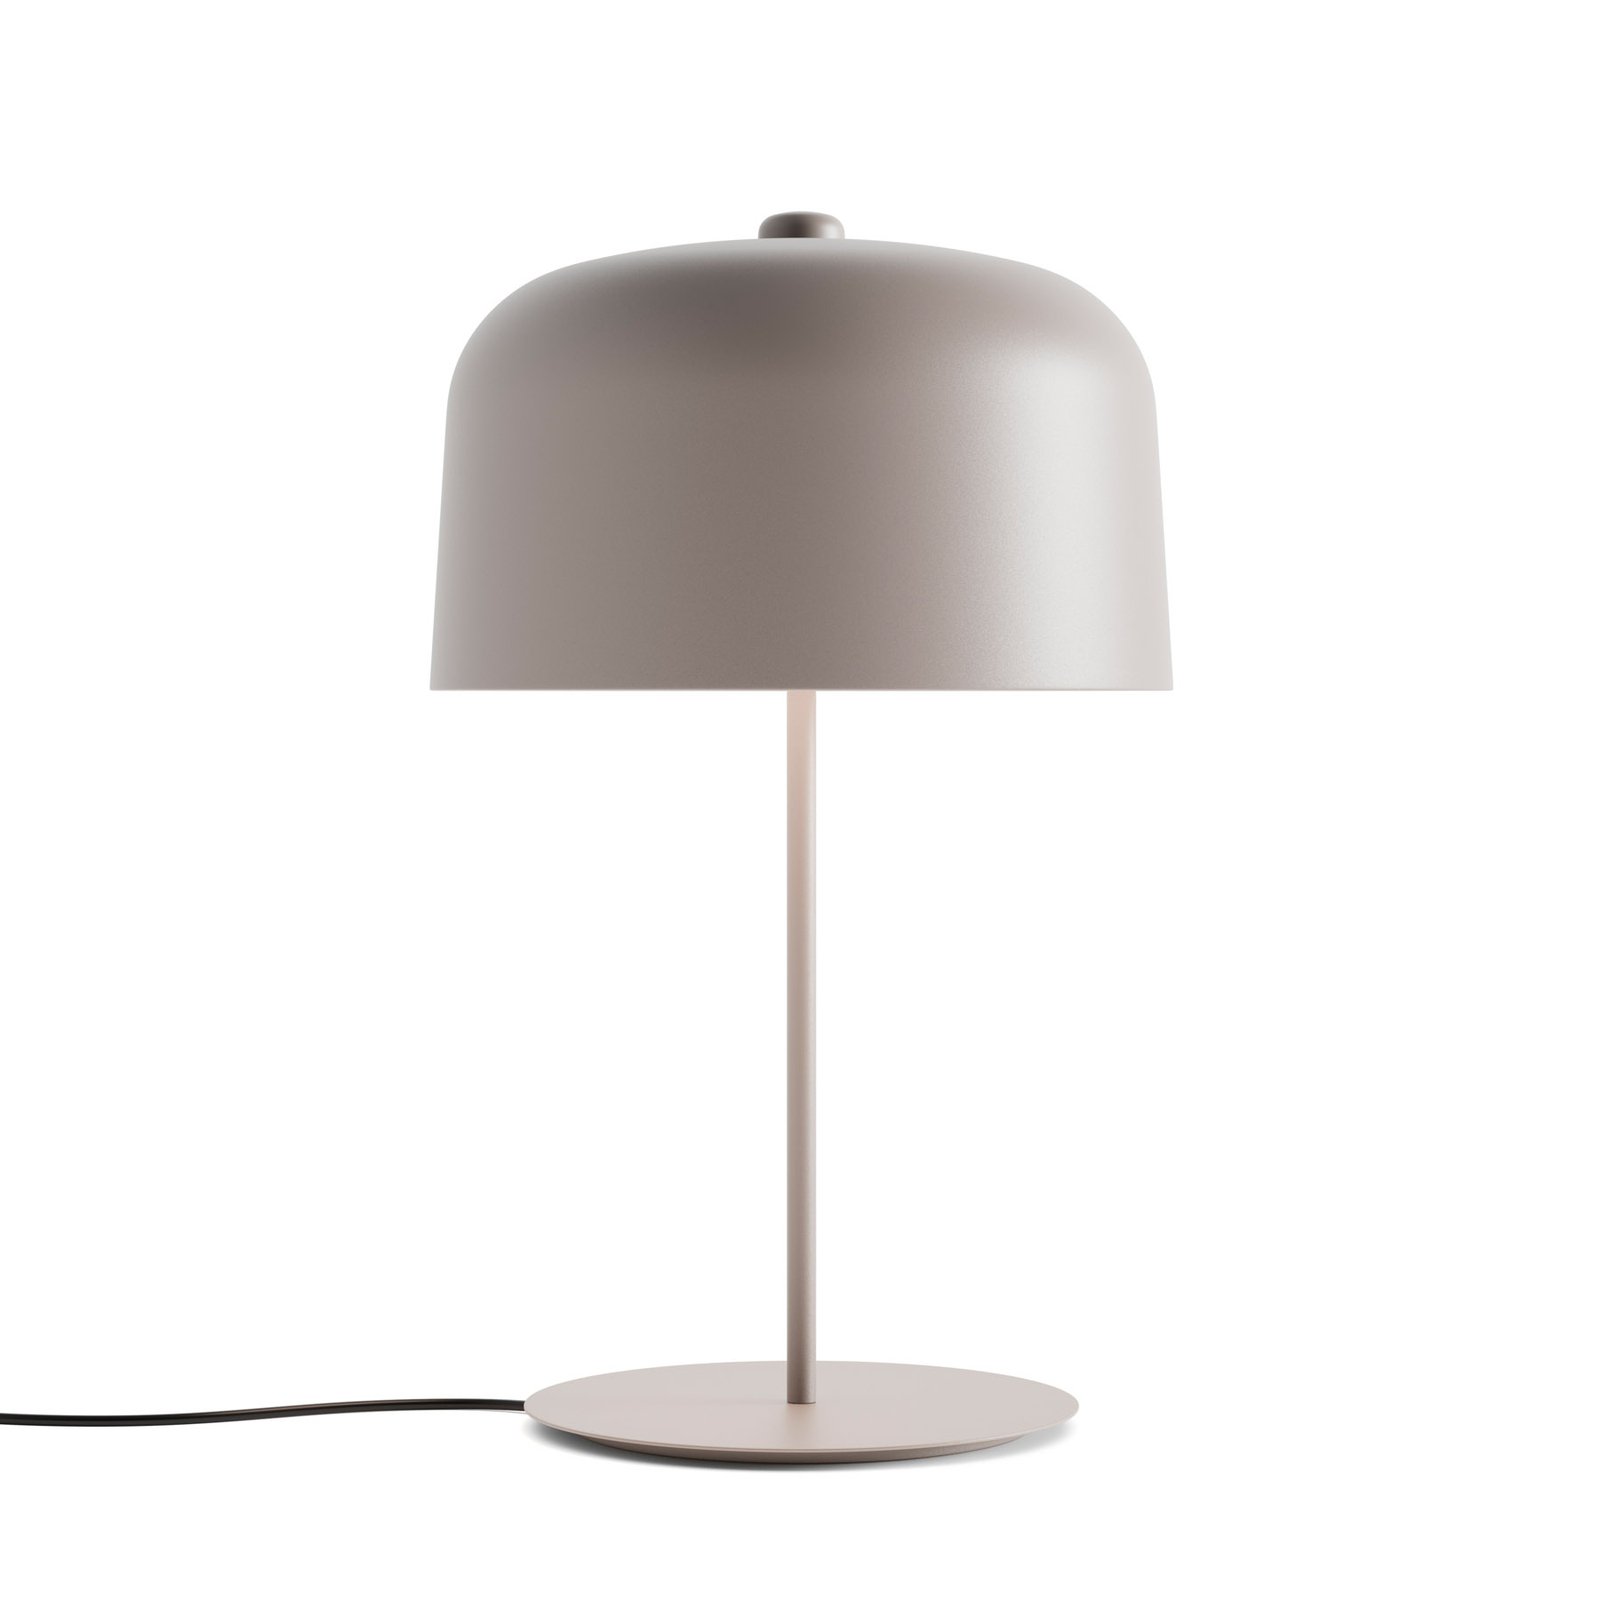 Luceplan Zile table lamp dove grey, height 66 cm